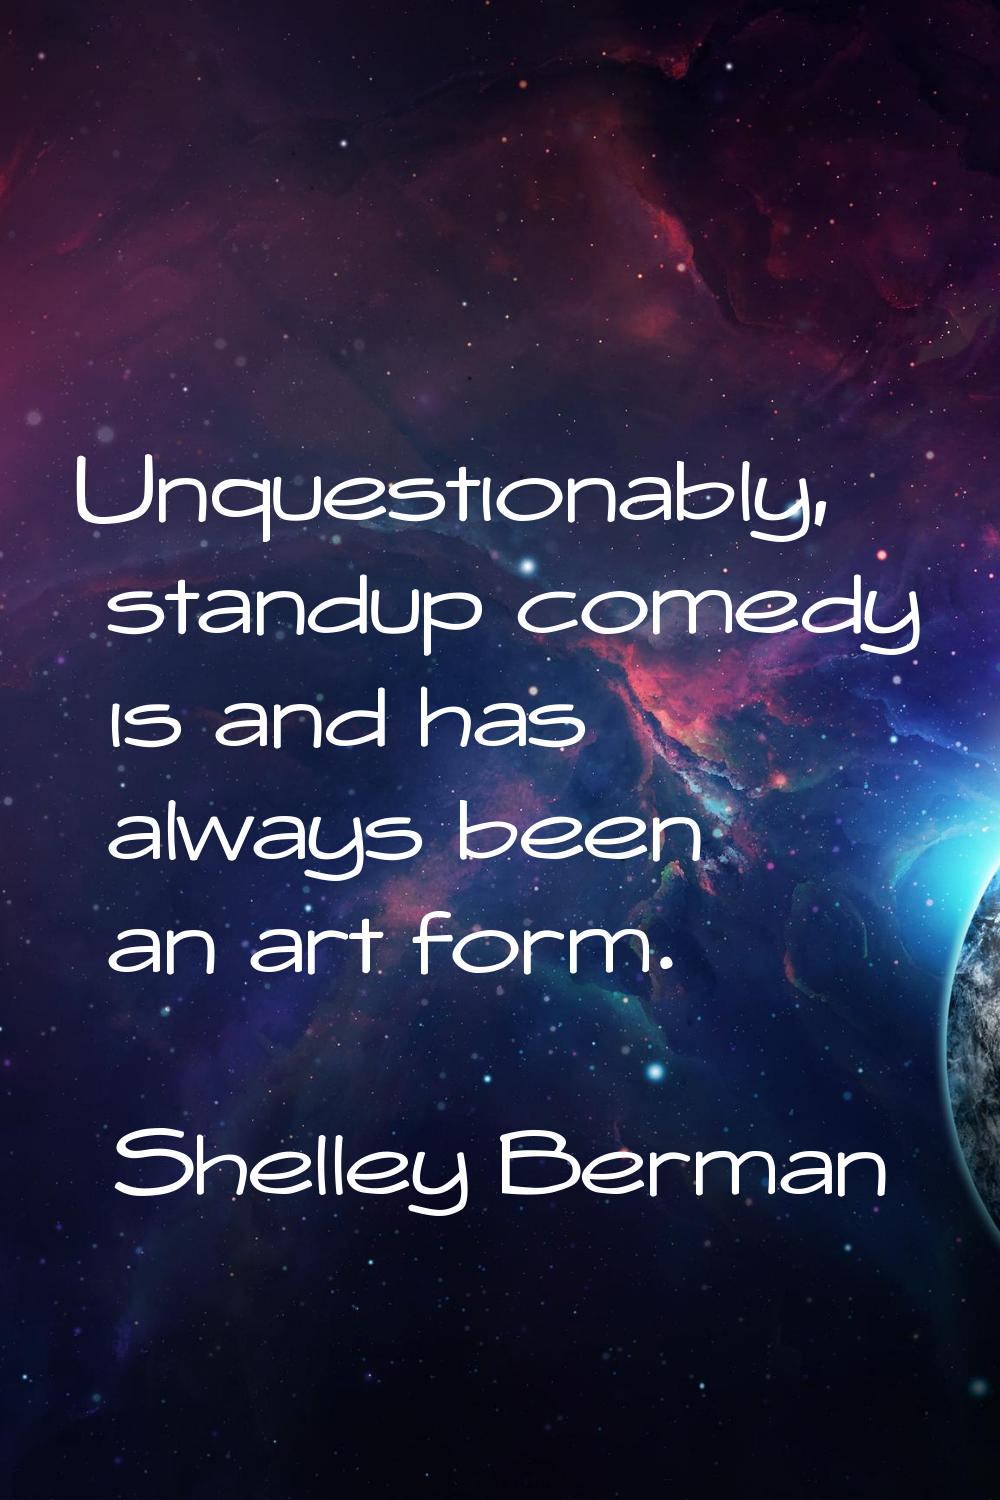 Unquestionably, standup comedy is and has always been an art form.